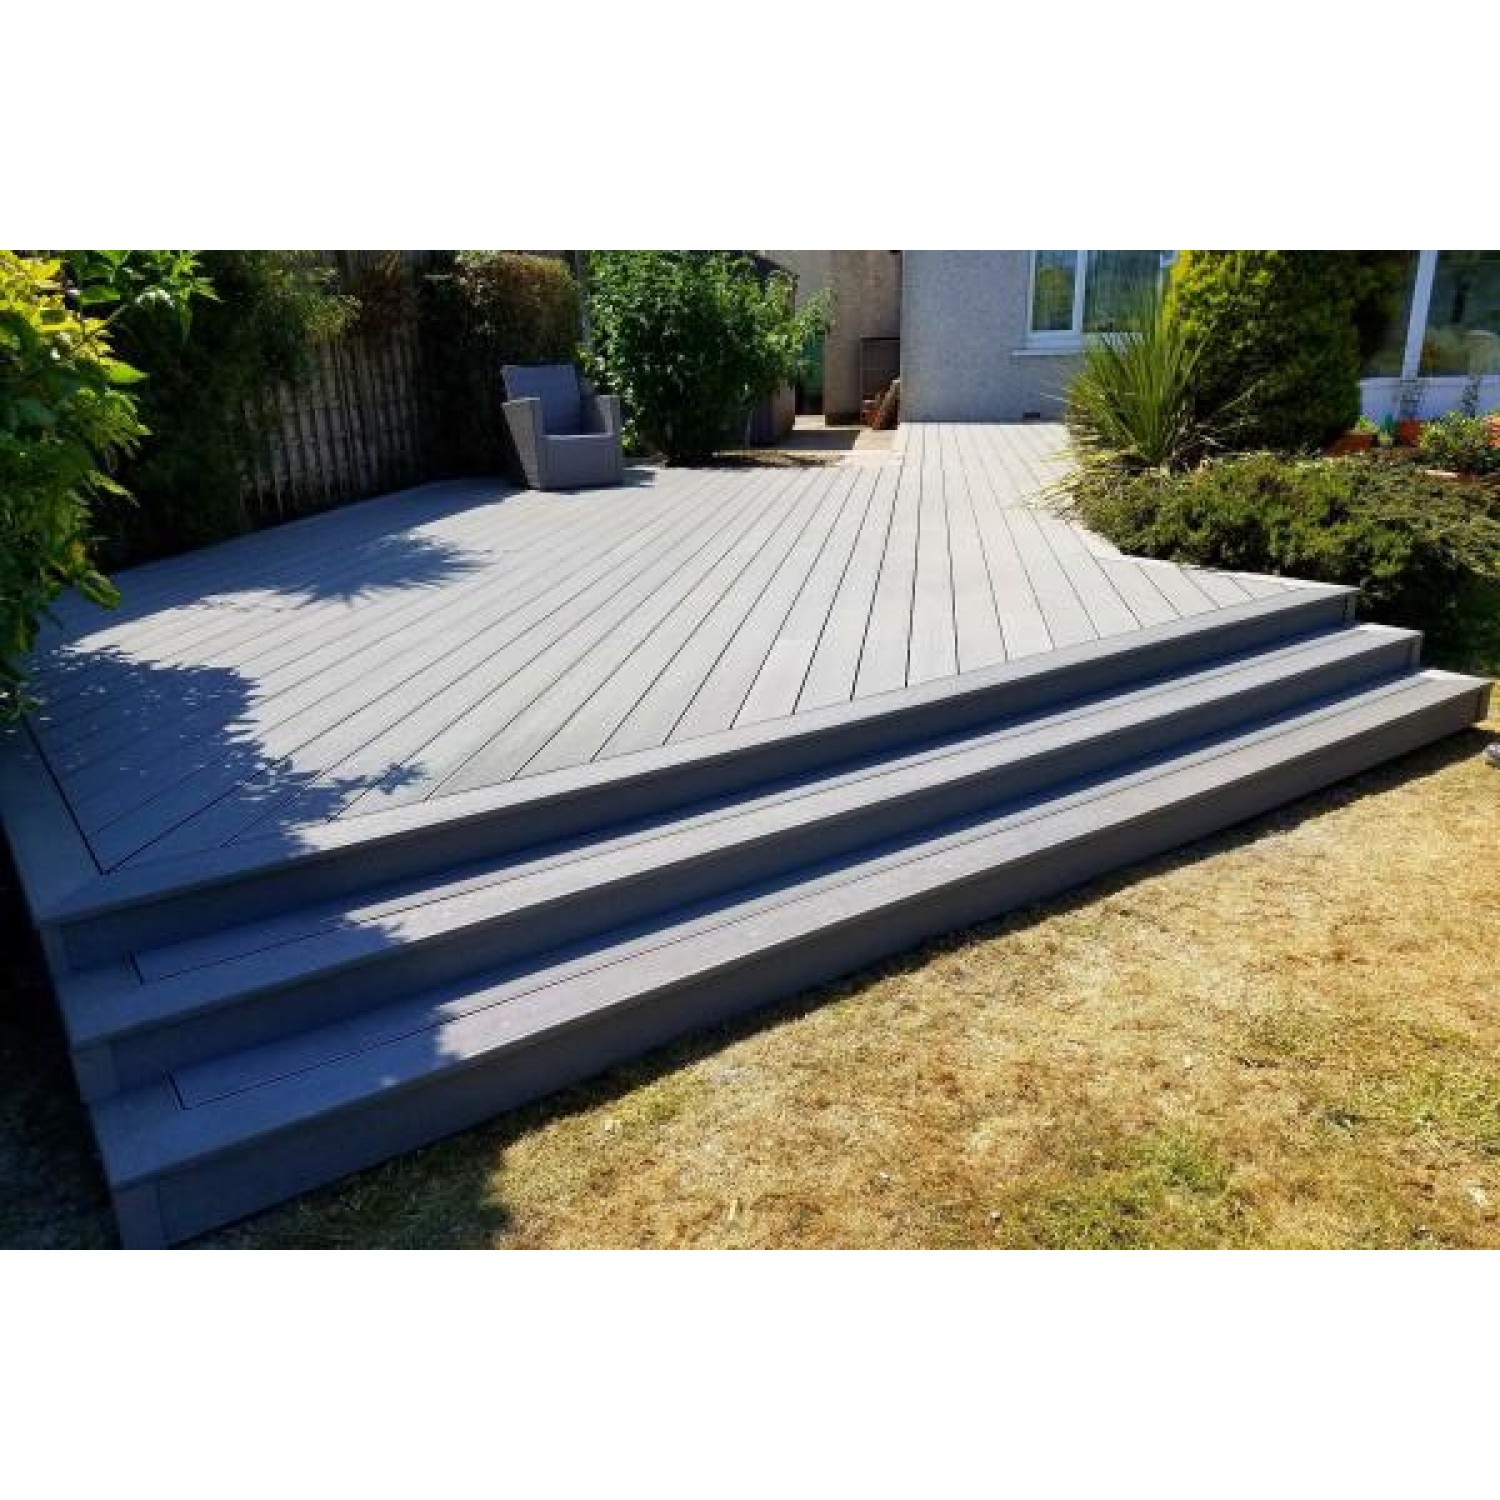 Cheap Decking Boards - My Hobby